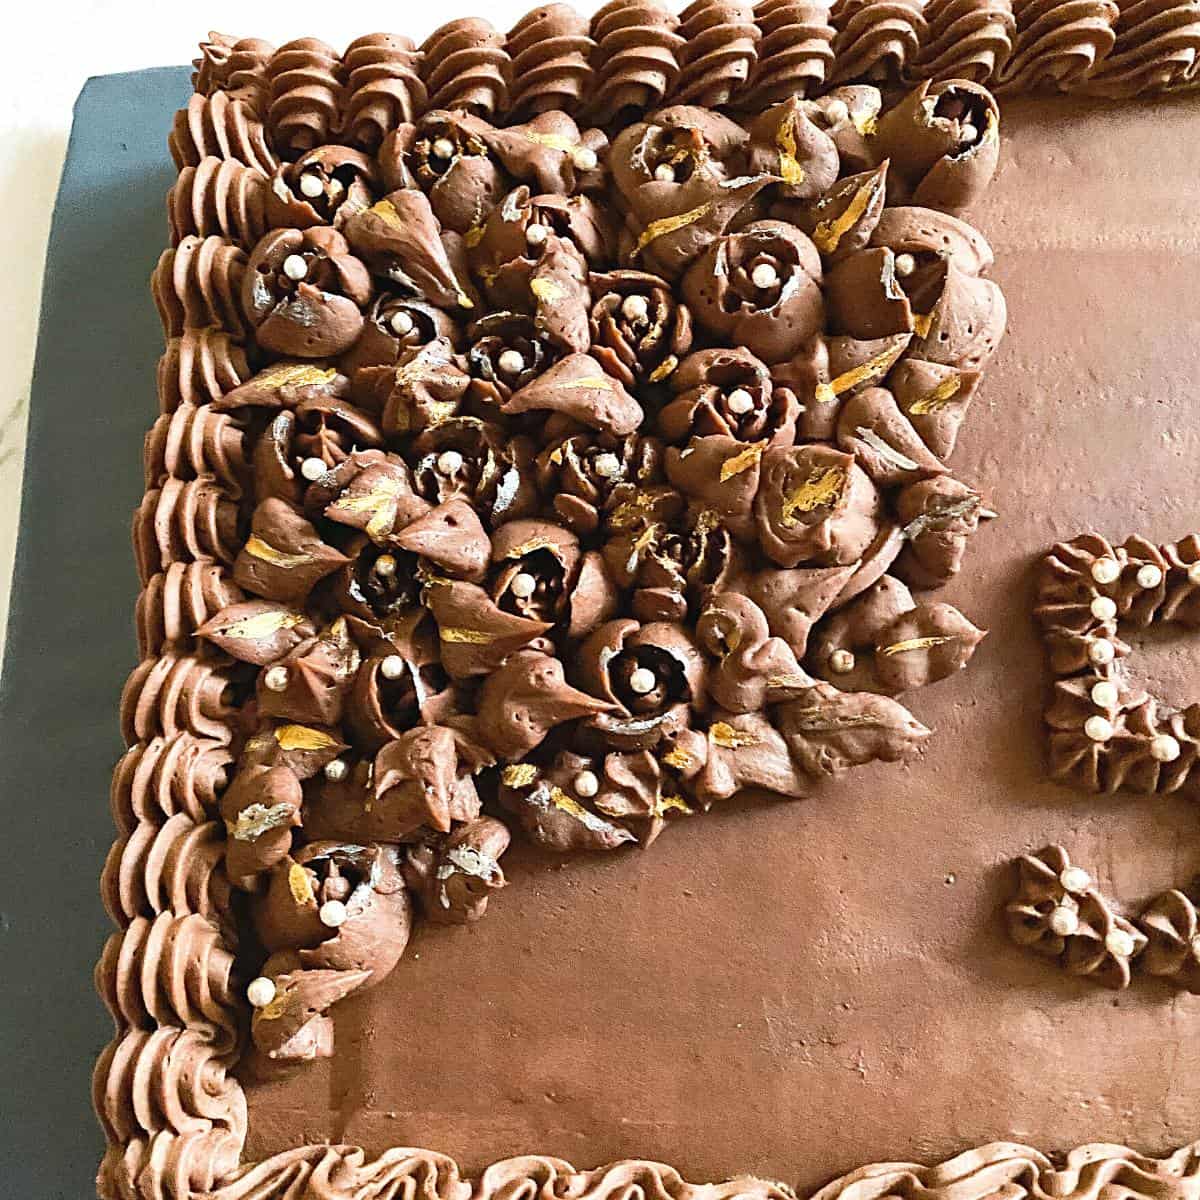 A sheet cake frosted with ganache.